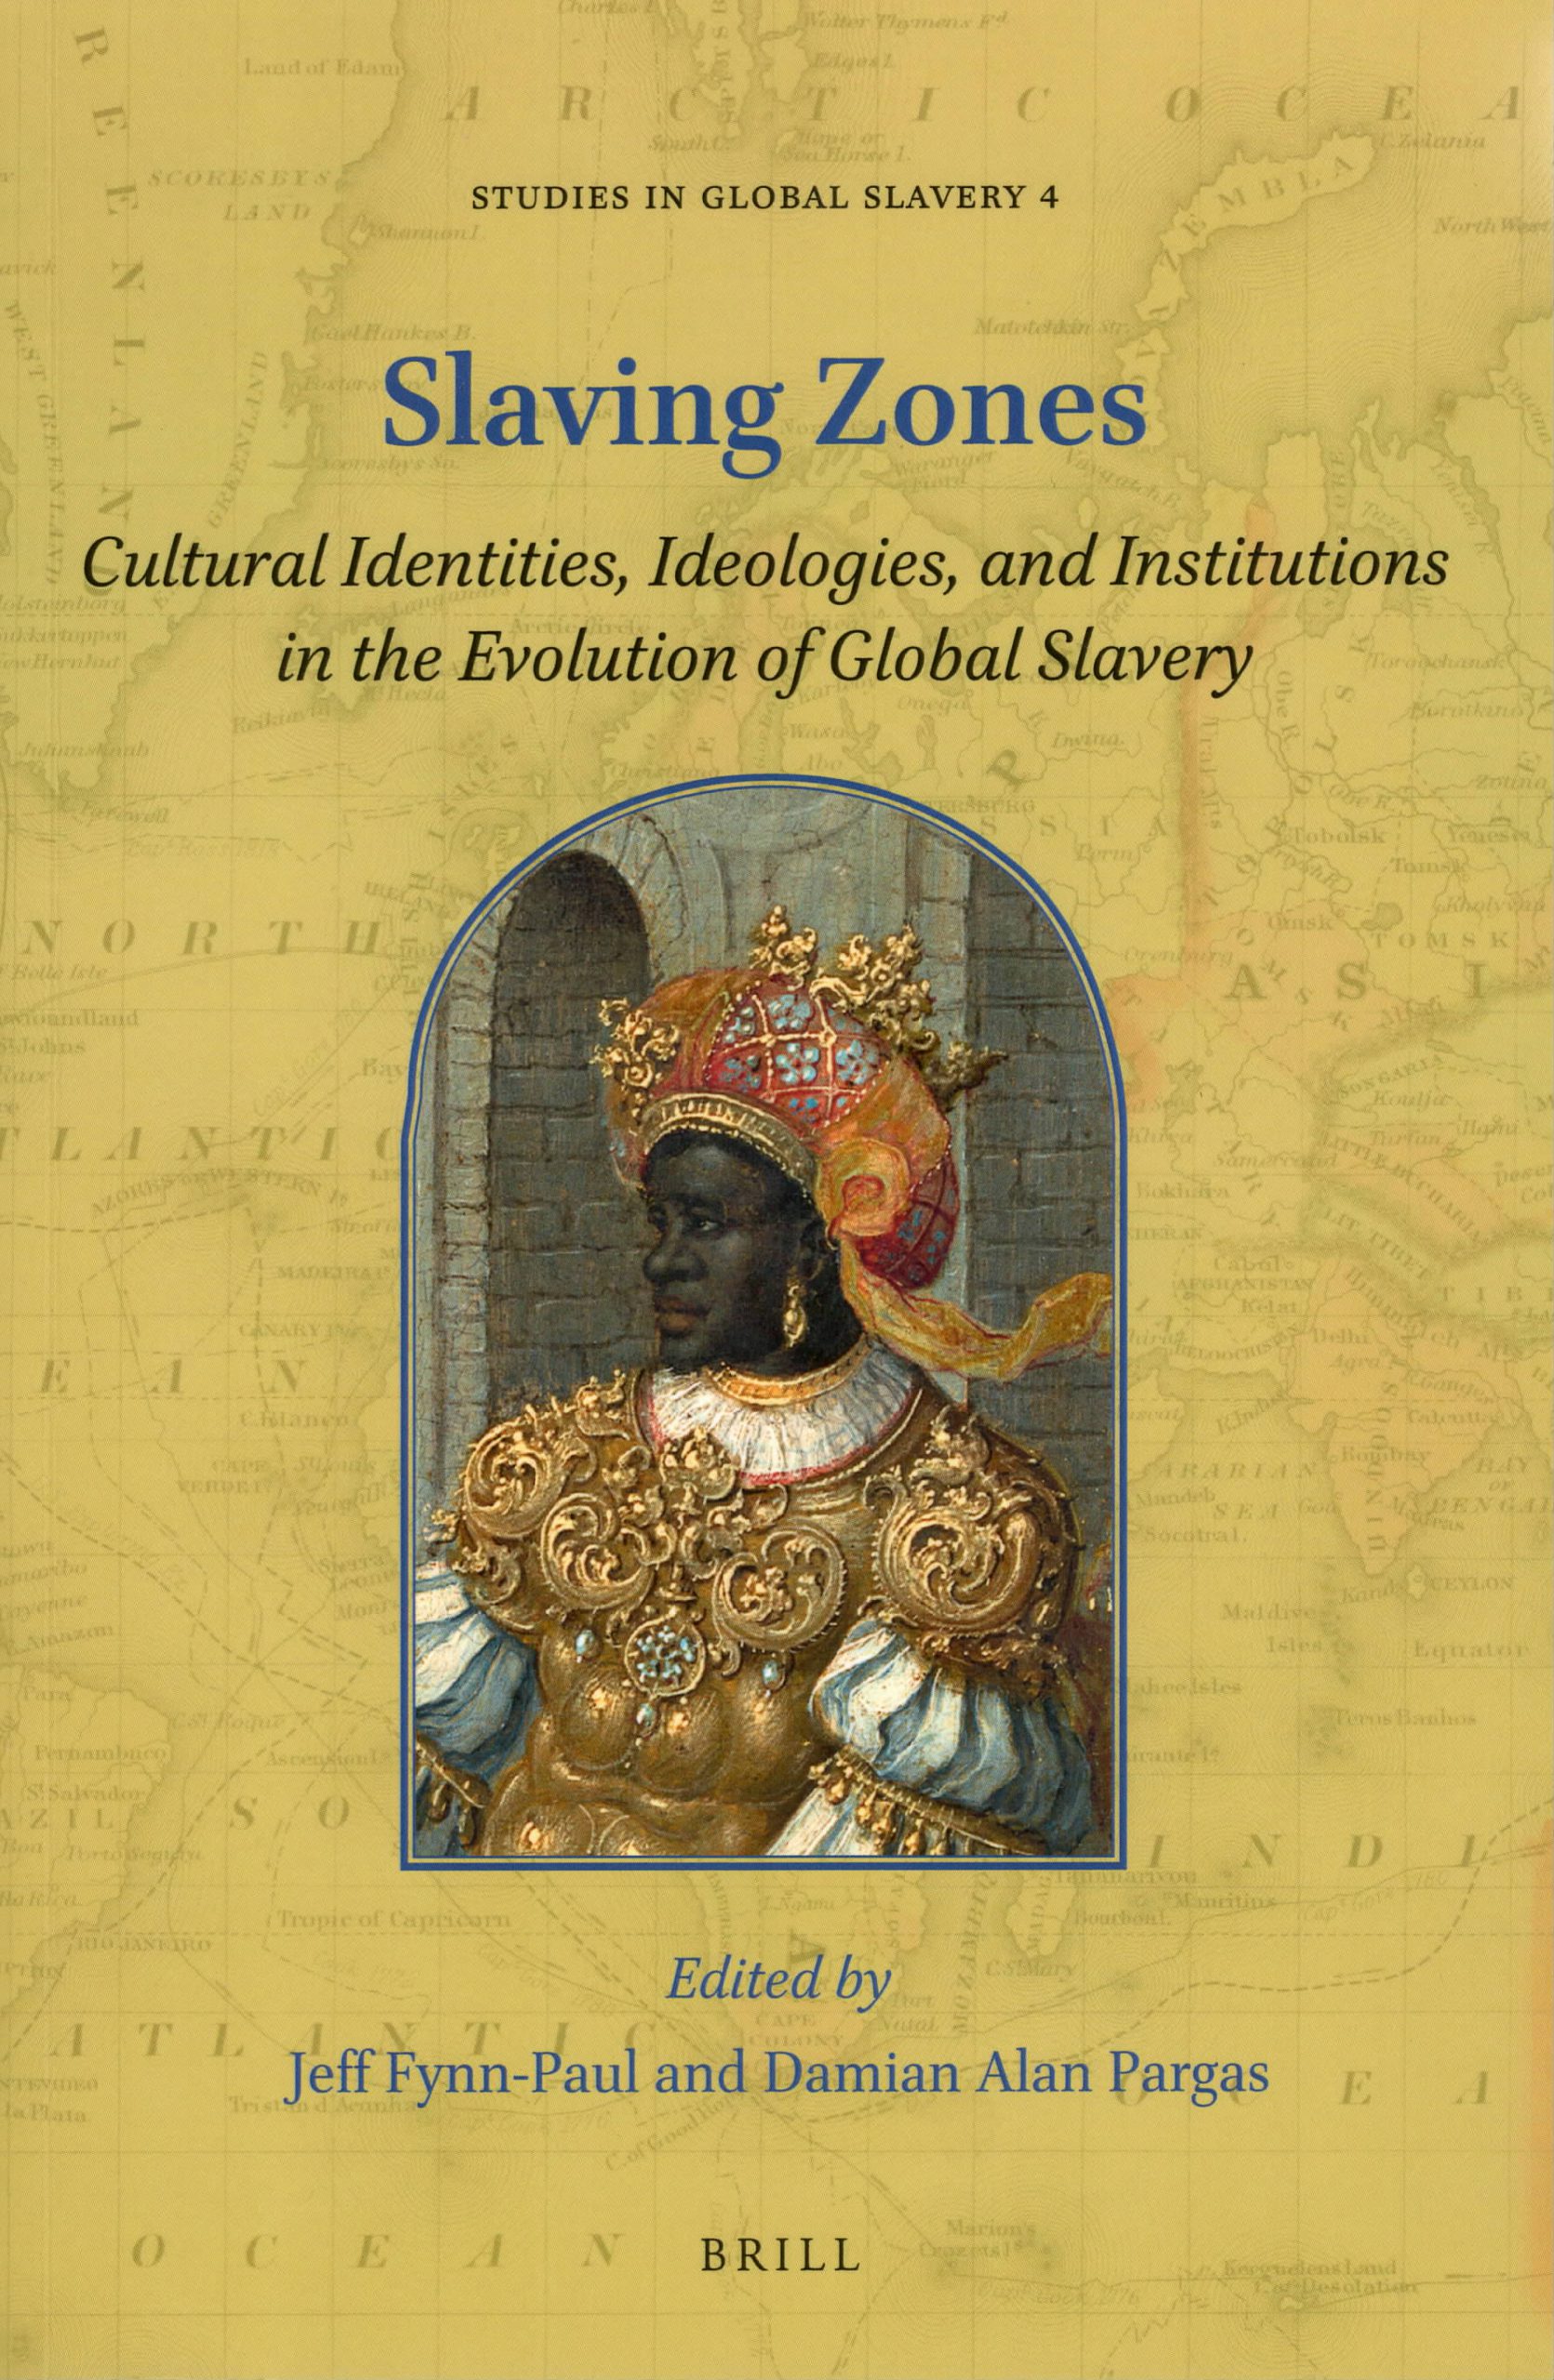 Slaving zones: cultural identities, ideologies, and institutions in the evolution of global slavery